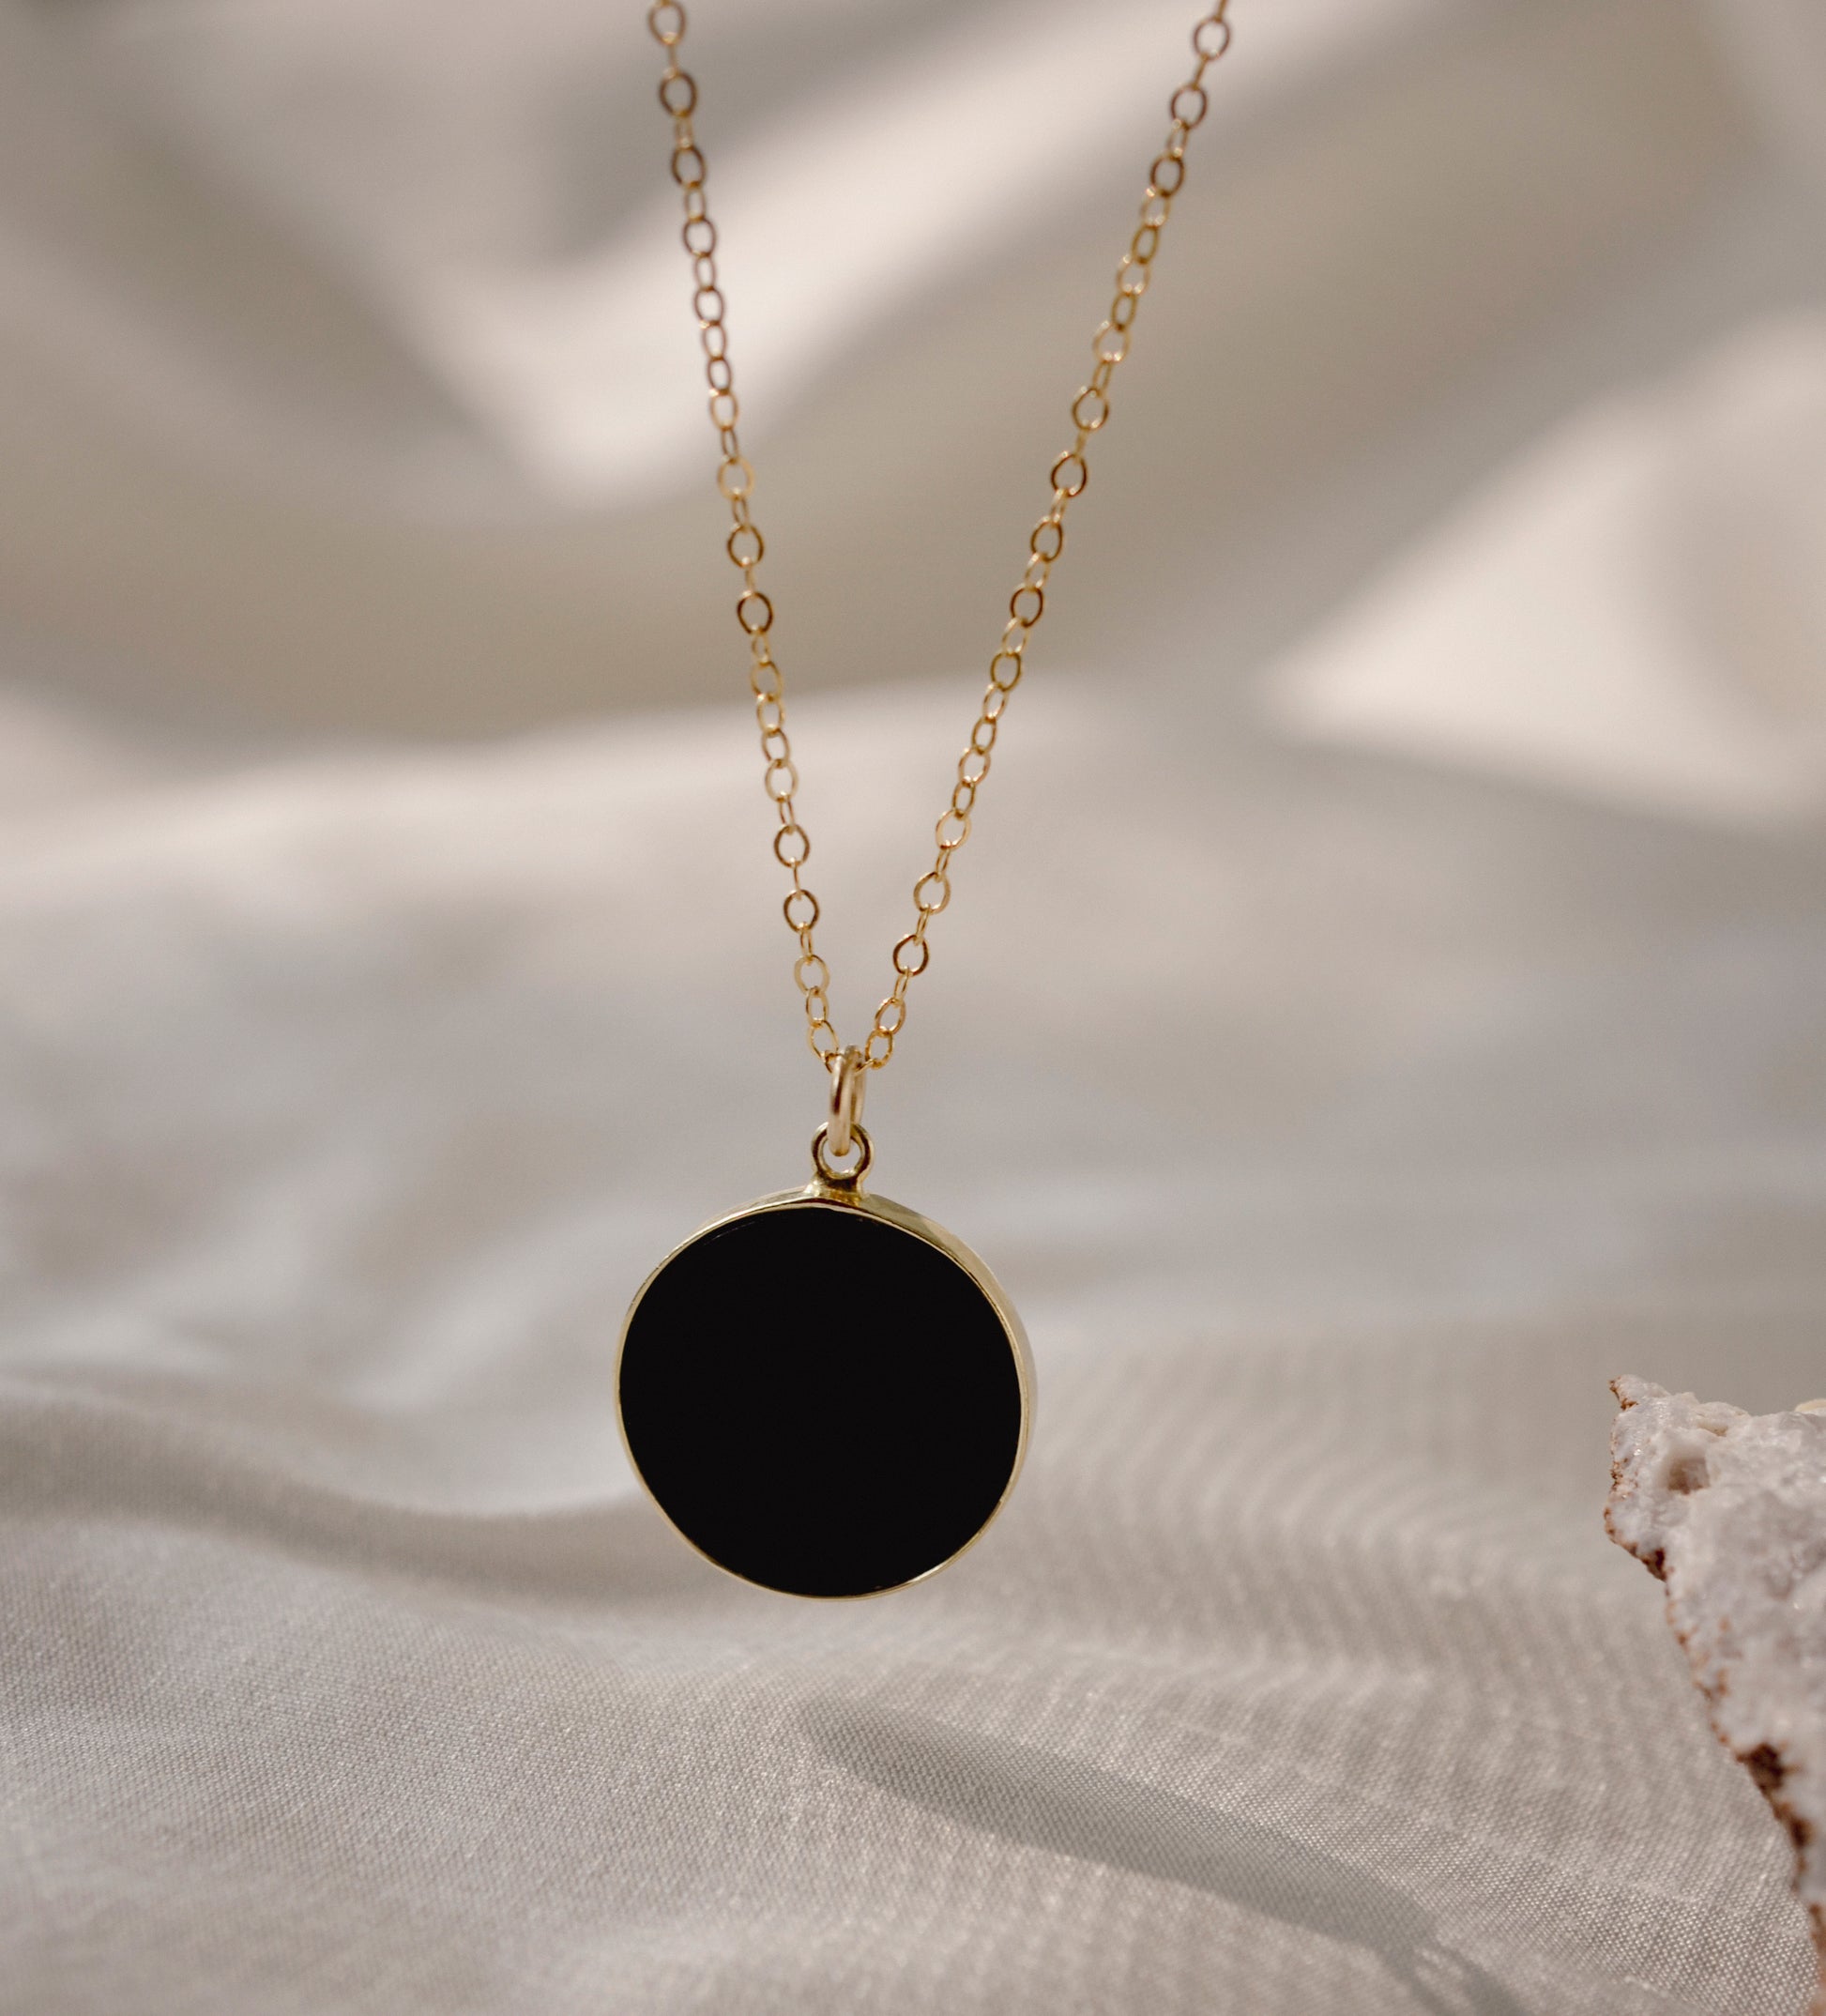 Black Onyx Circle Pendant, Handmade Onyx Necklace, Sterling Silver, 14k Gold Filled